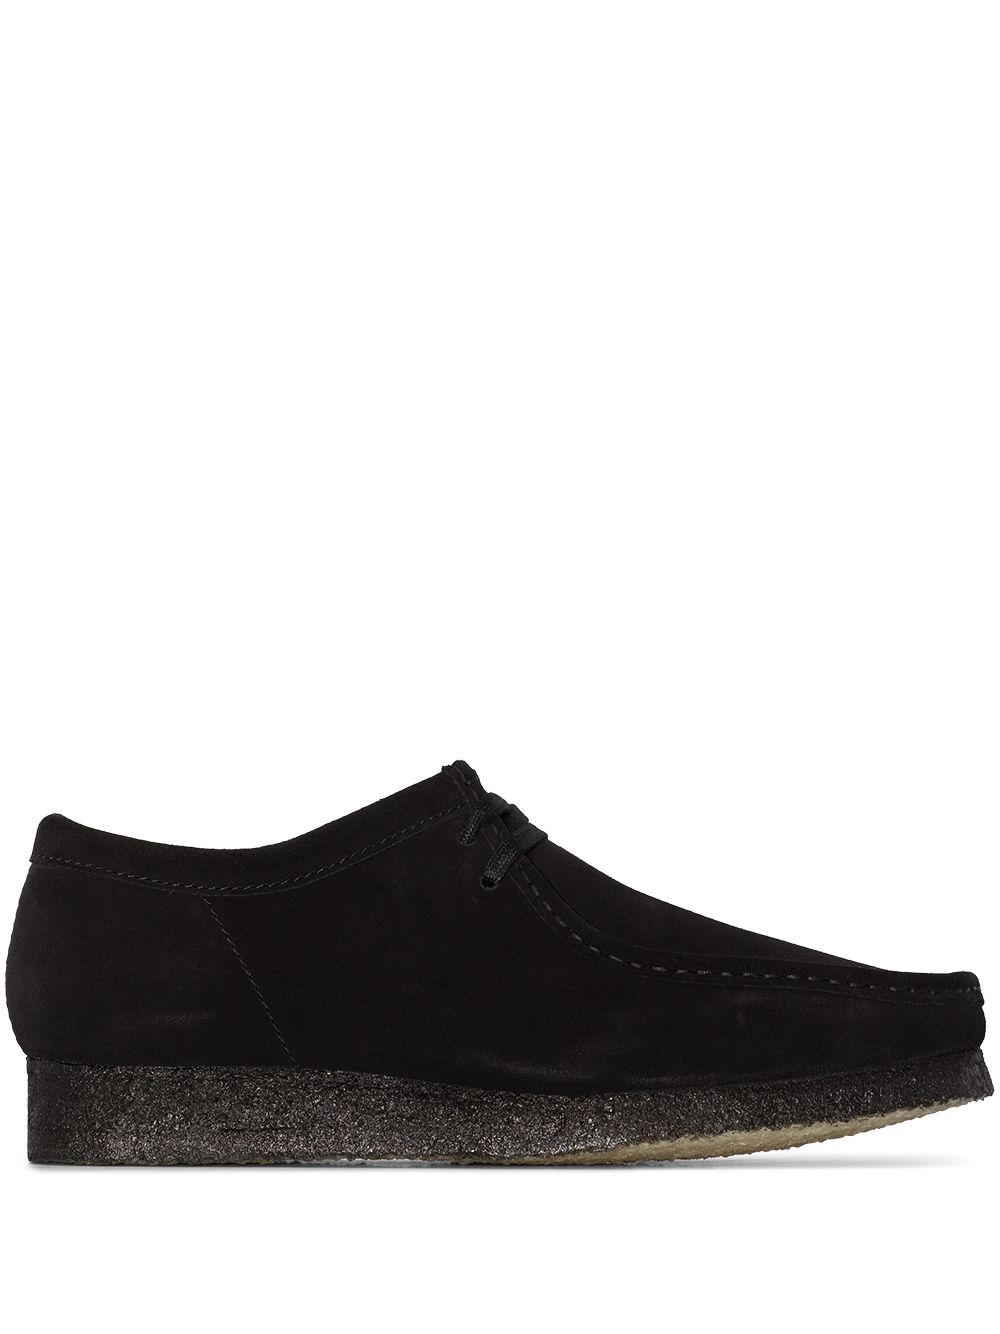 Wallabee lace-up shoes